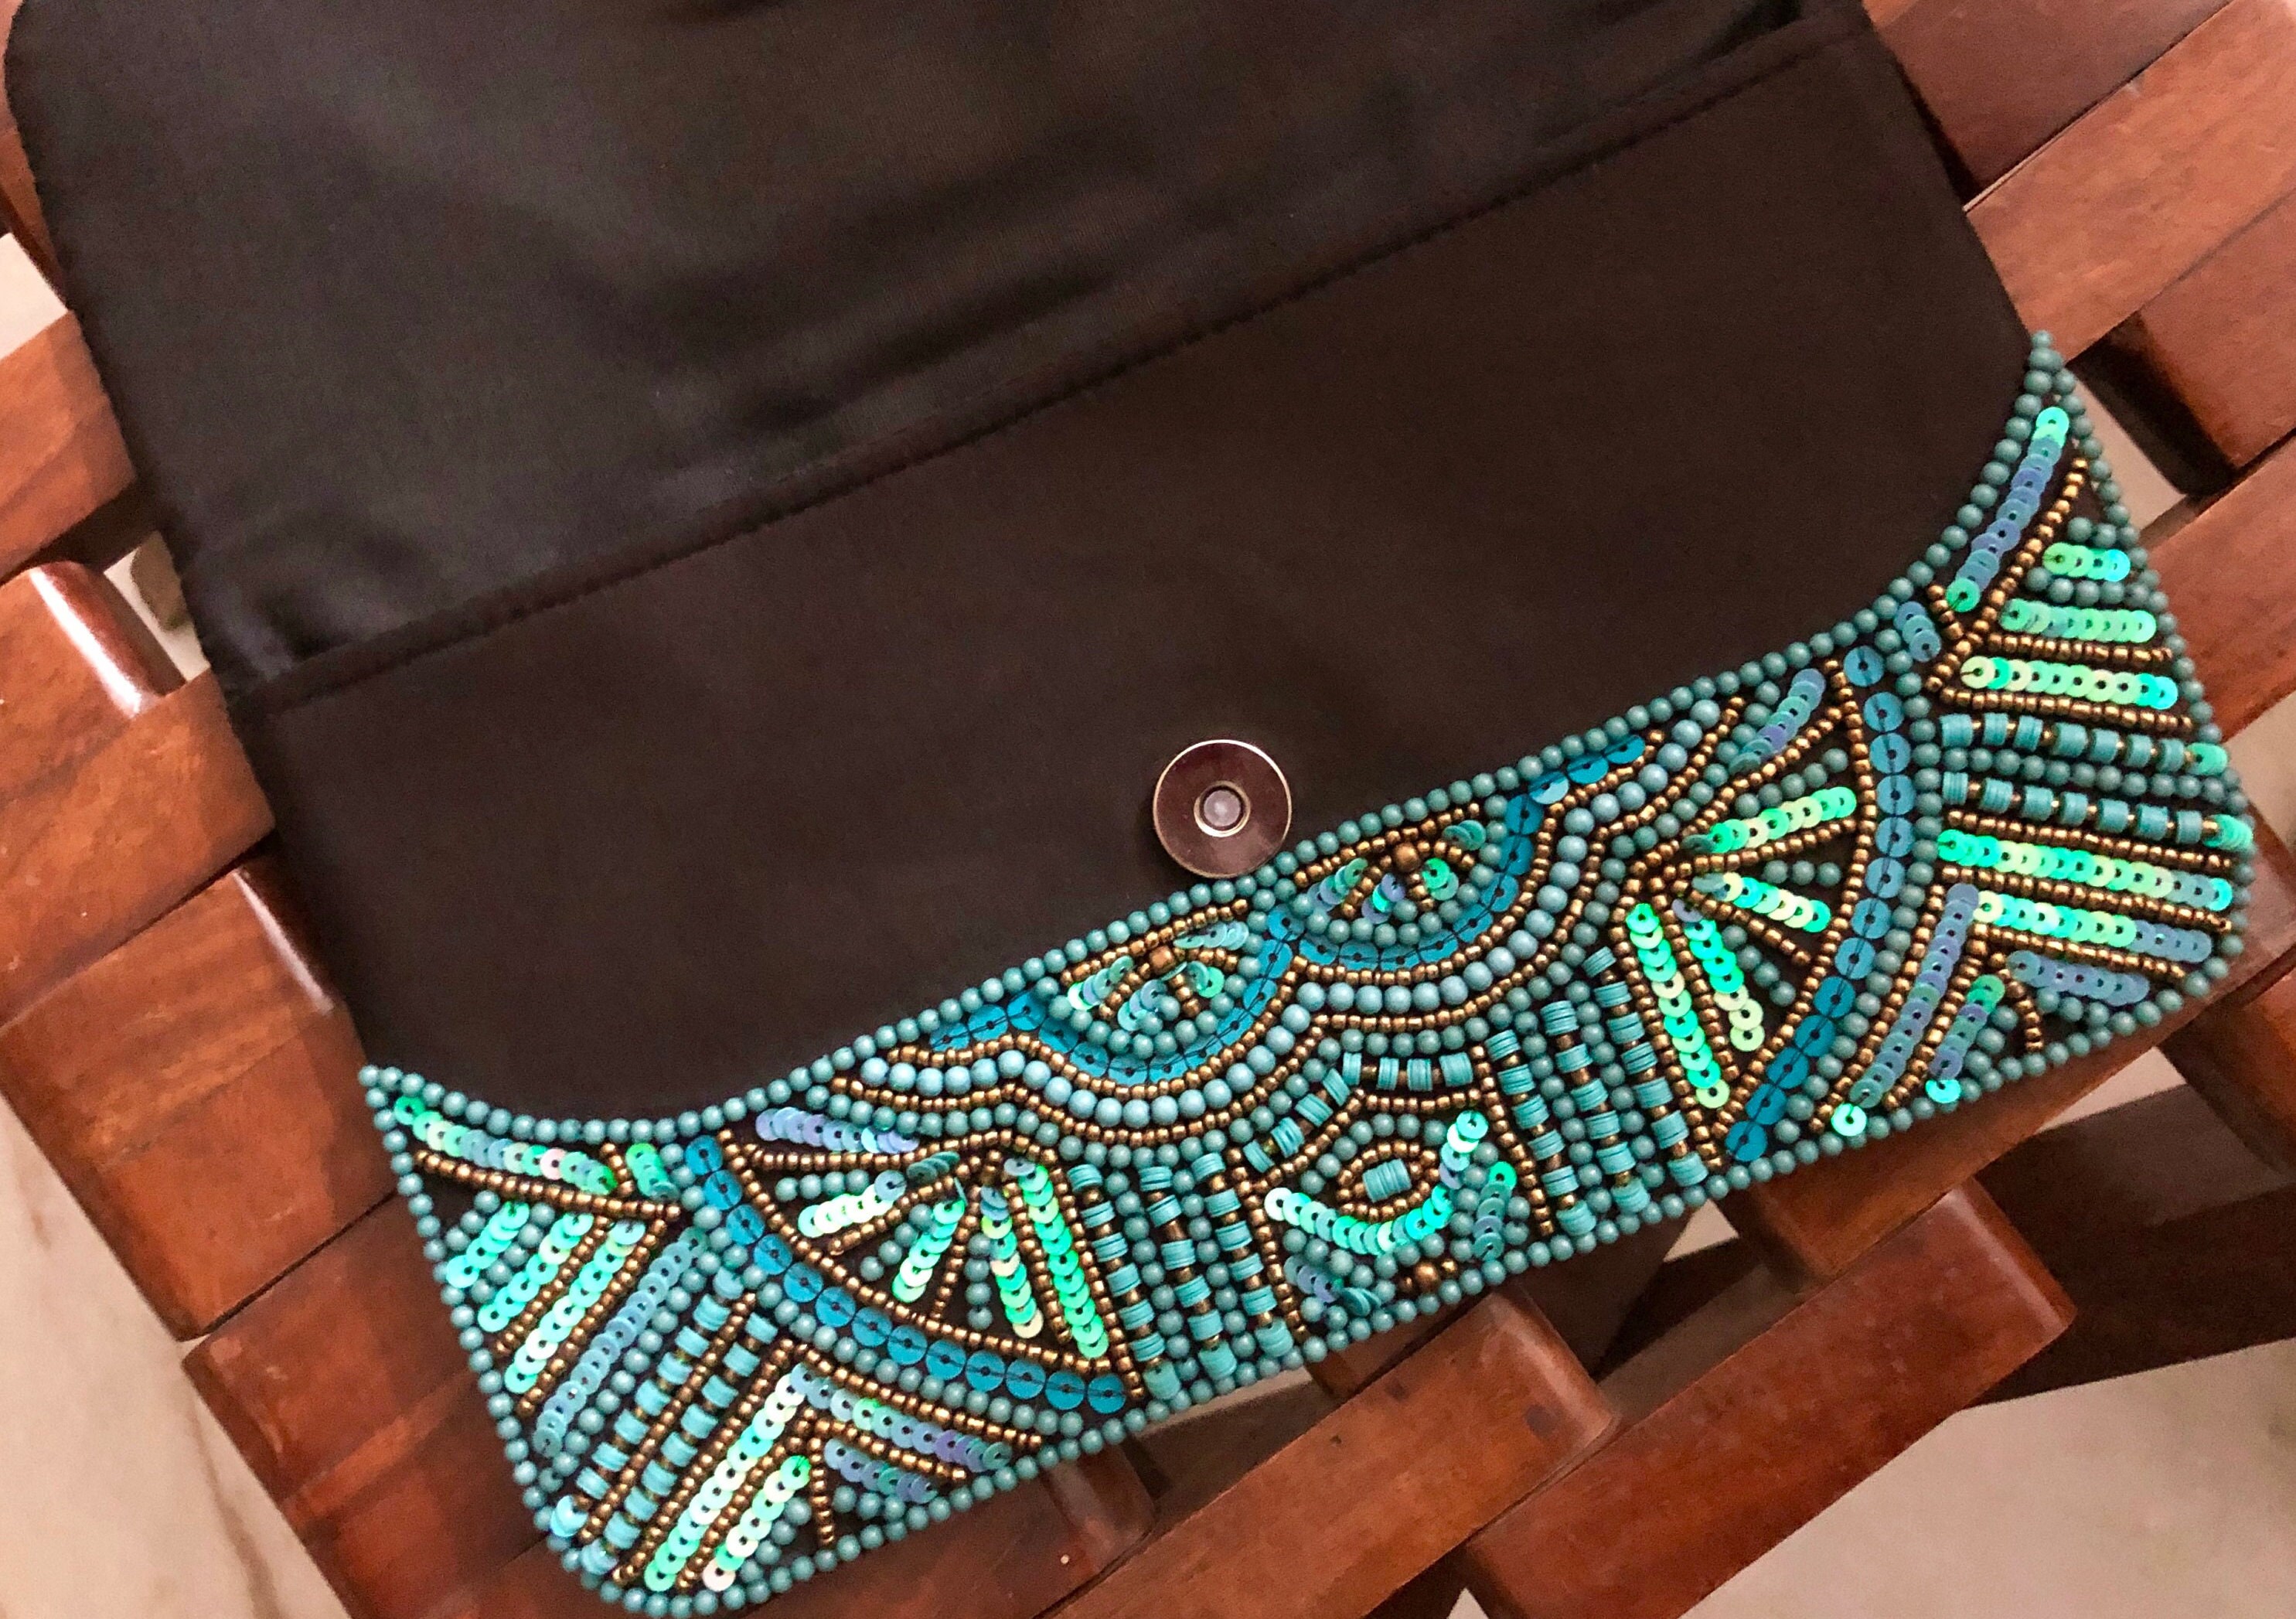 Turquoise Handmade Beaded Clutch Evening Clutch Bag Formal -  Finland